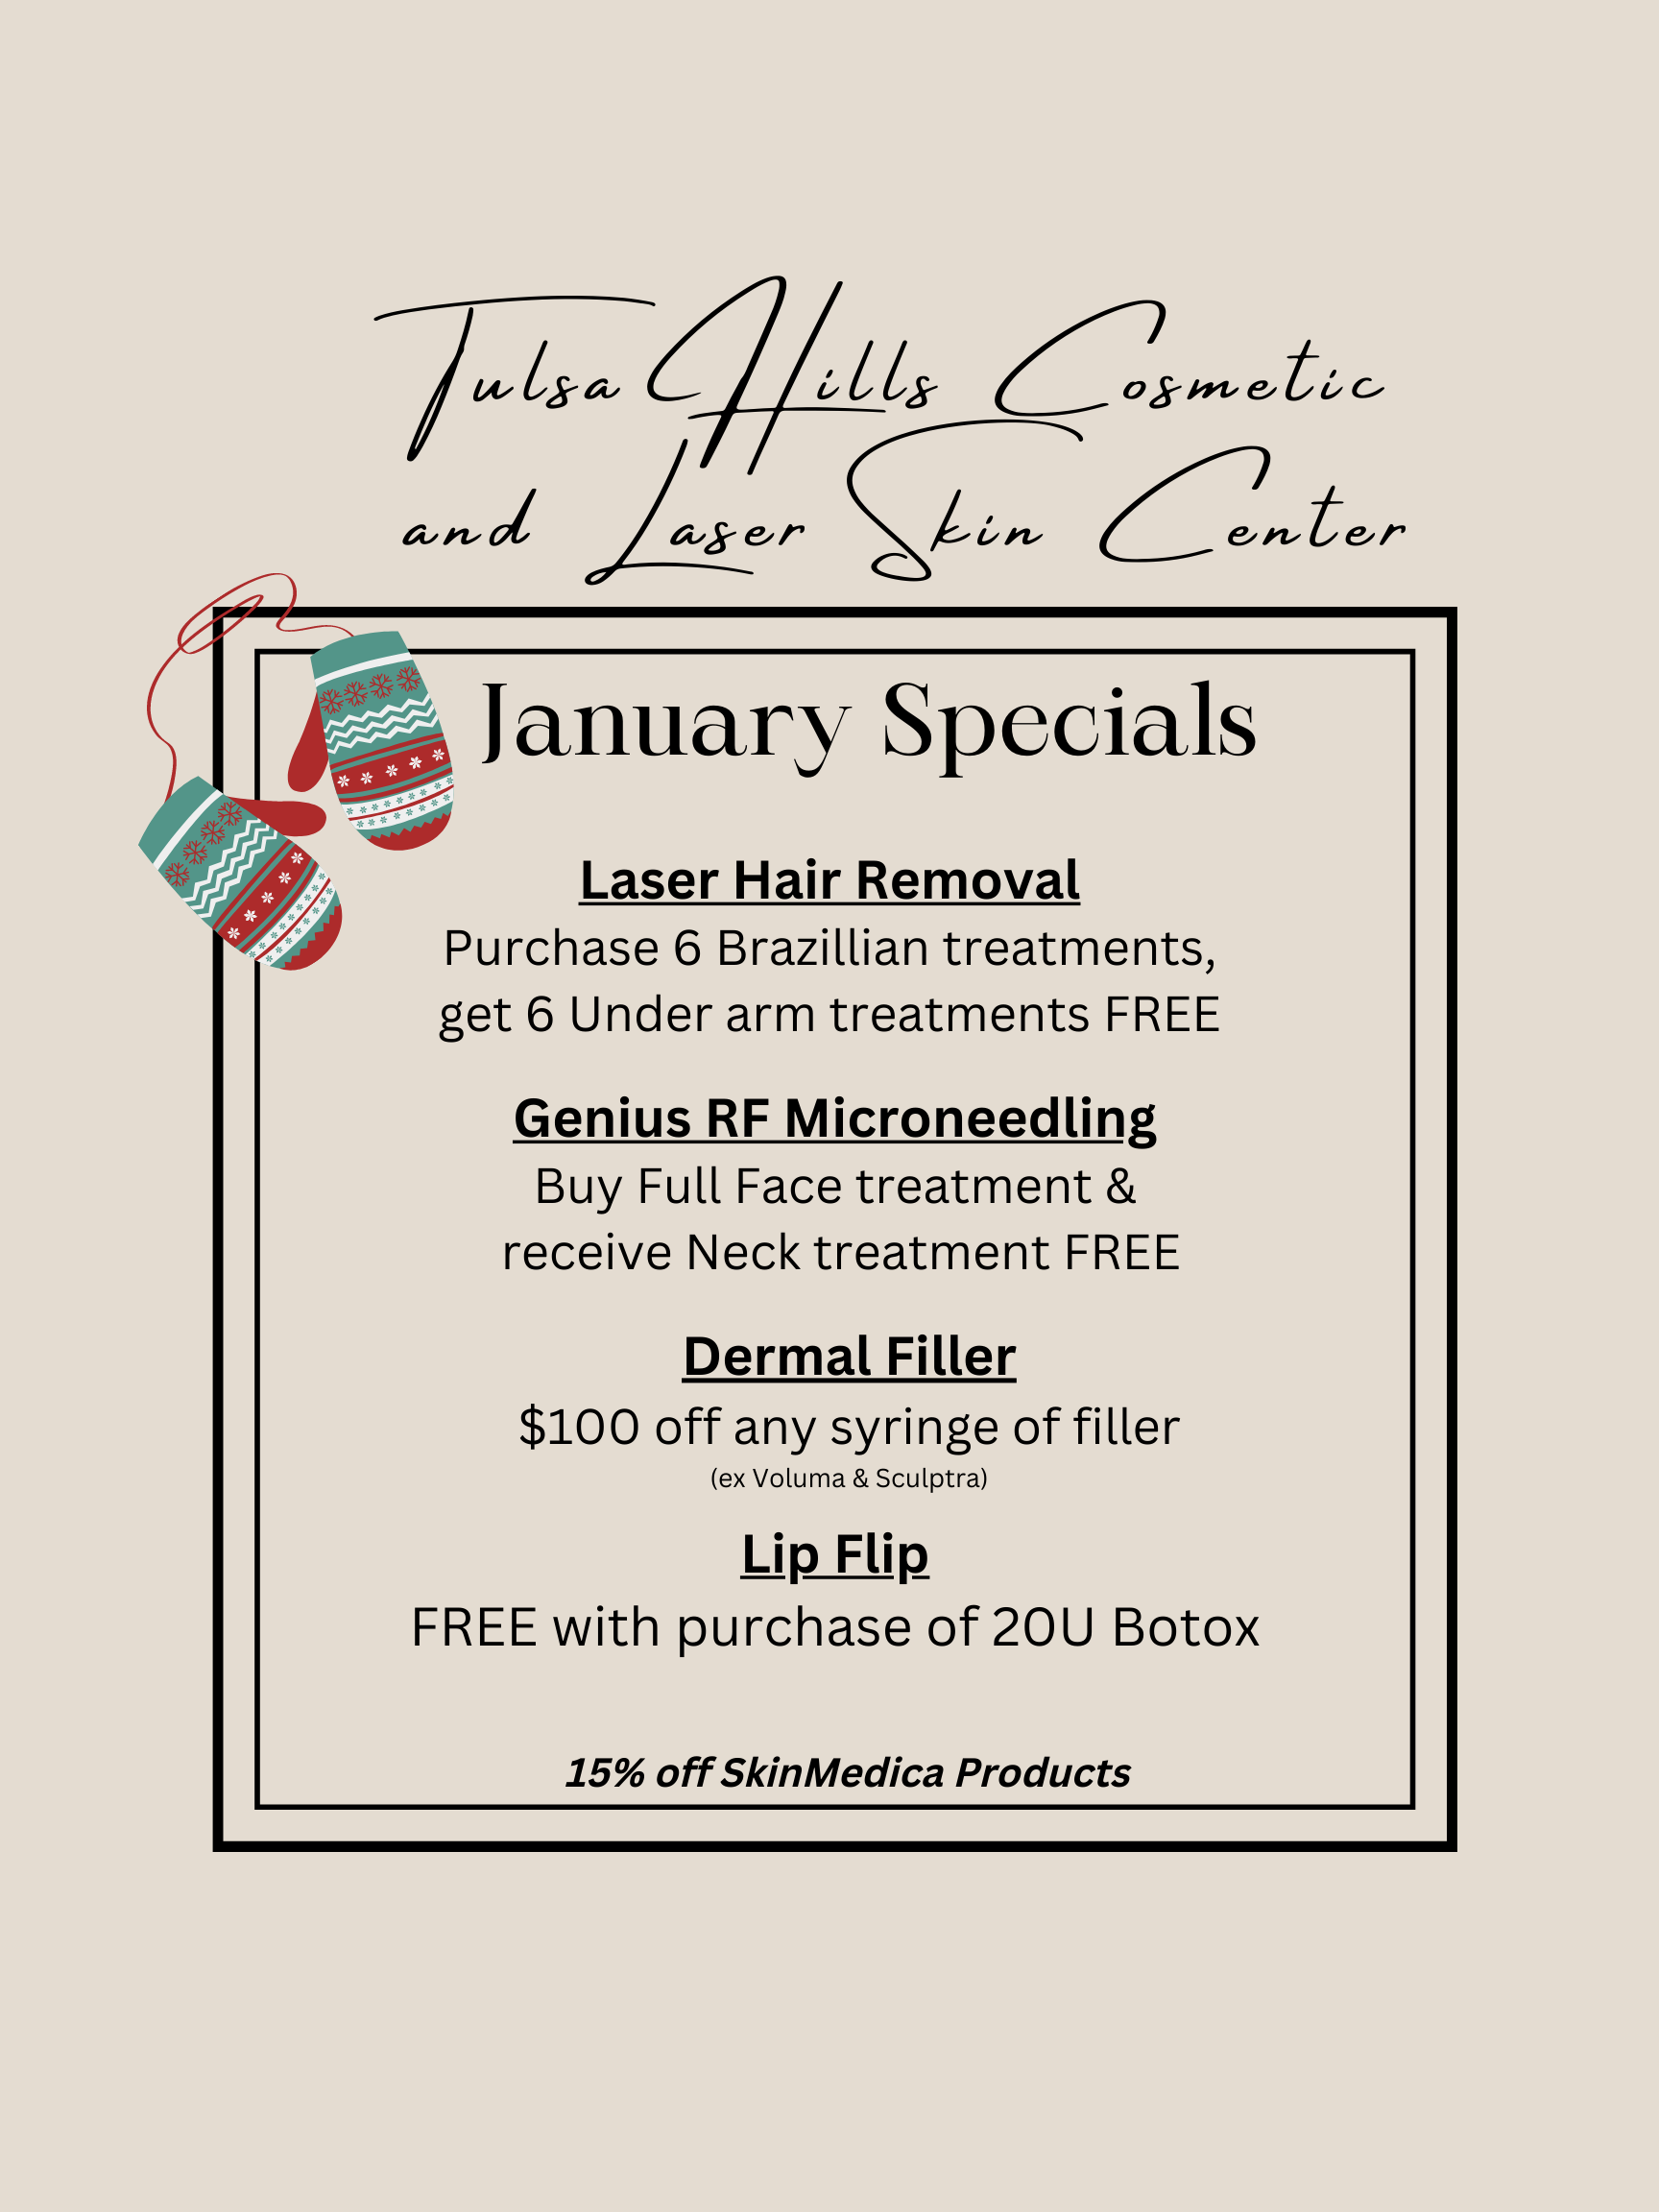 New Year Specials